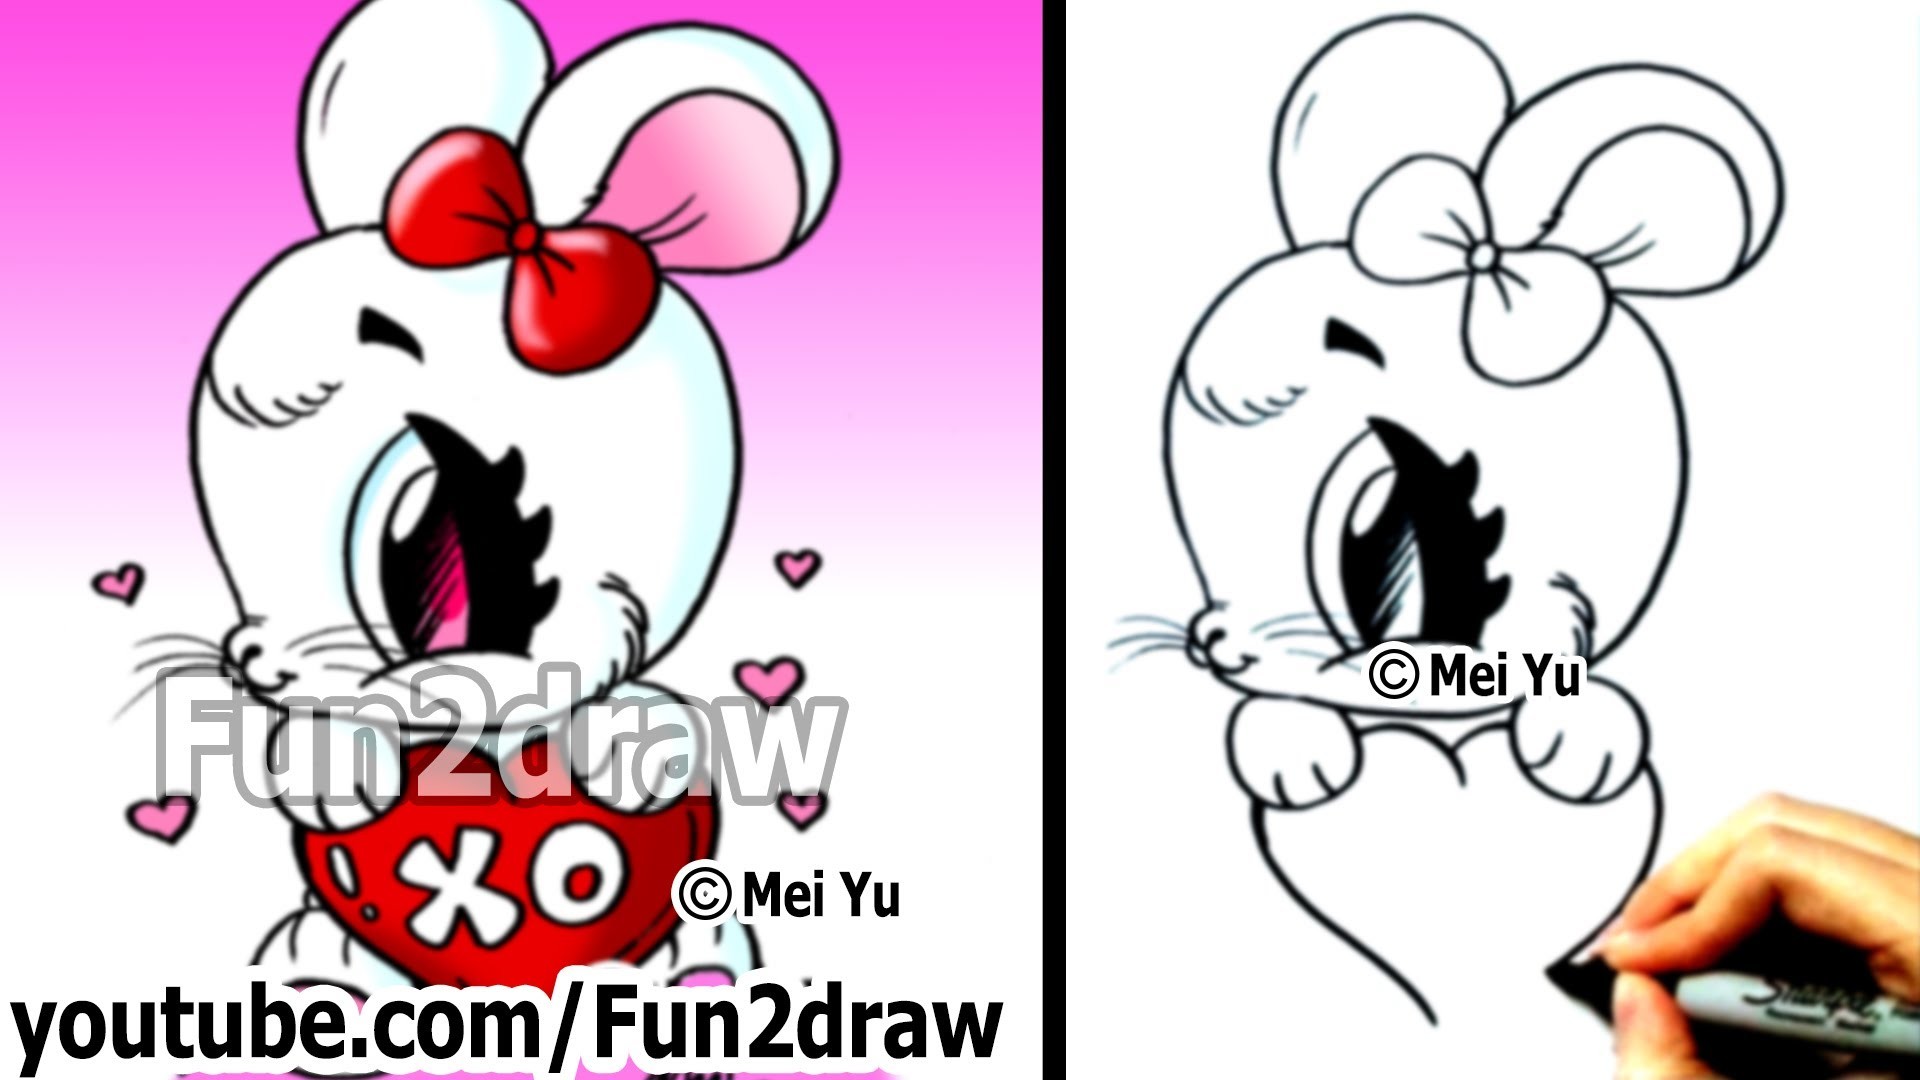 1920x1080 How to Draw a Rabbit with a Heart (Valentine's Day) - Easy Drawings - Cute  Drawings - Fun2draw - YouTube